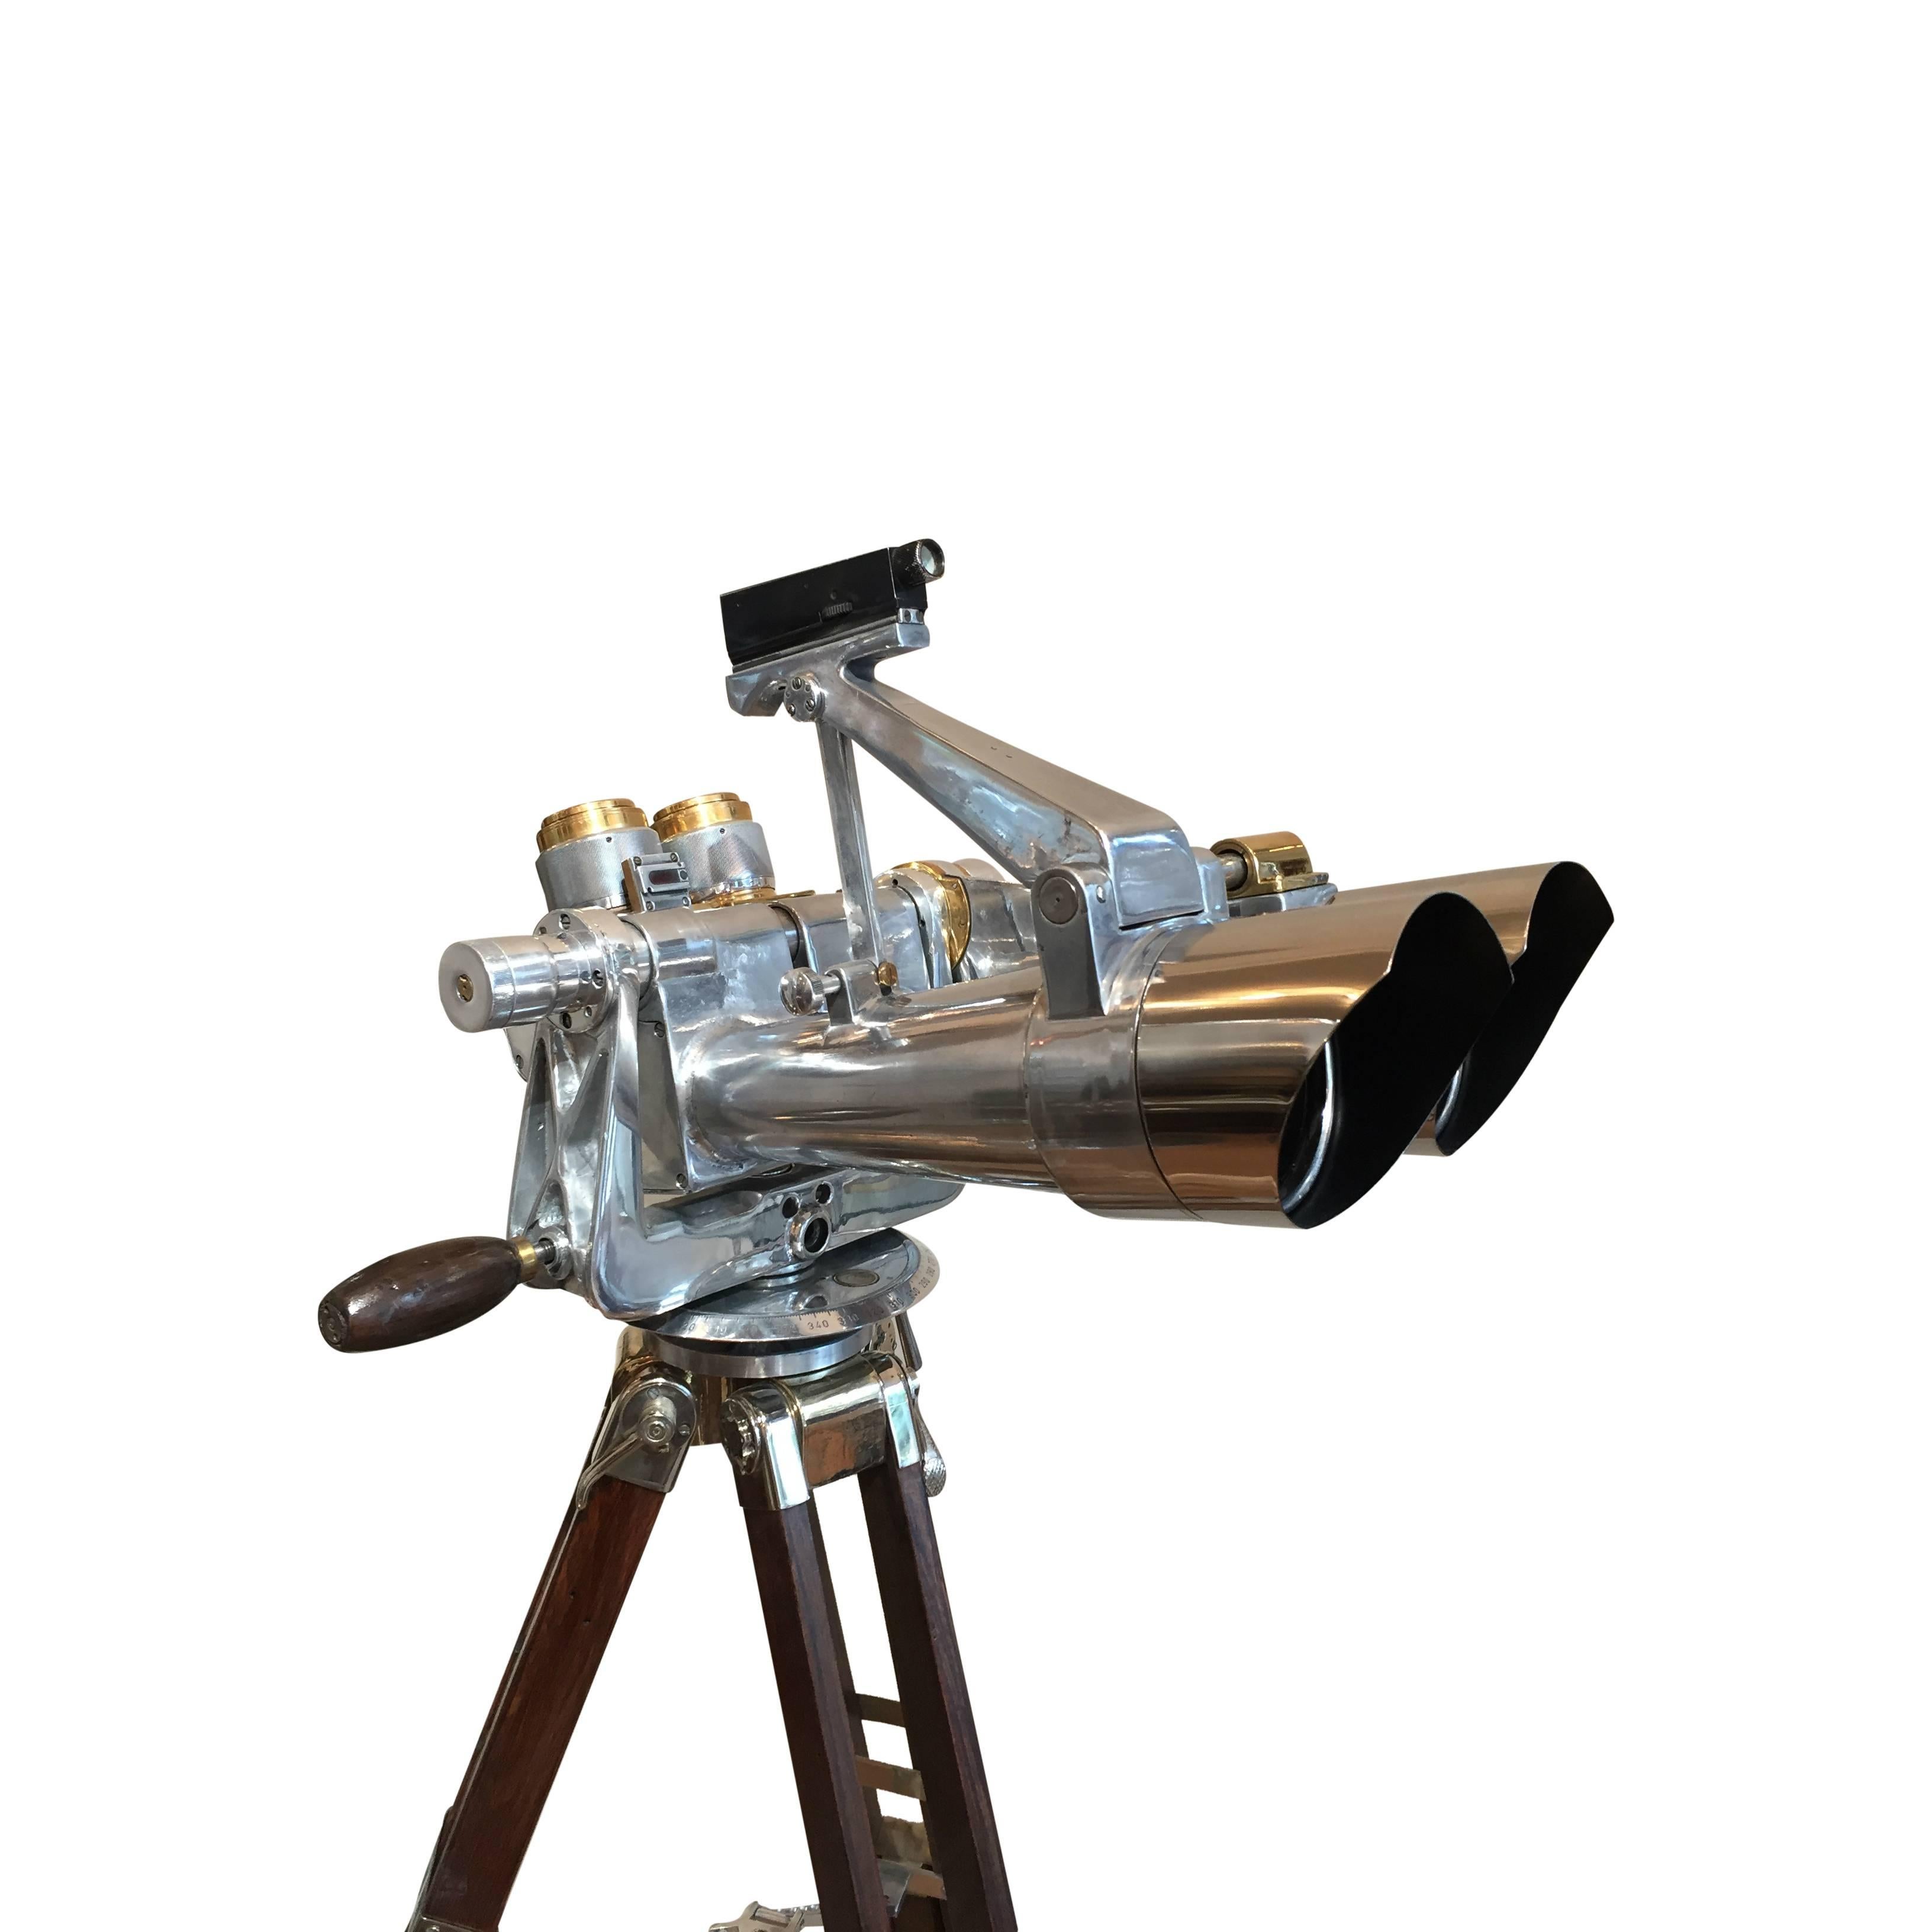 These stunning 80º 10 x 80 Kriegsmarine binoculars optics created by Carl Zeiss during the World War II period. The prototype was developed, circa 1938 and were considered a Sonderkonstruktion or special construction by Zeiss.

The stark angle of